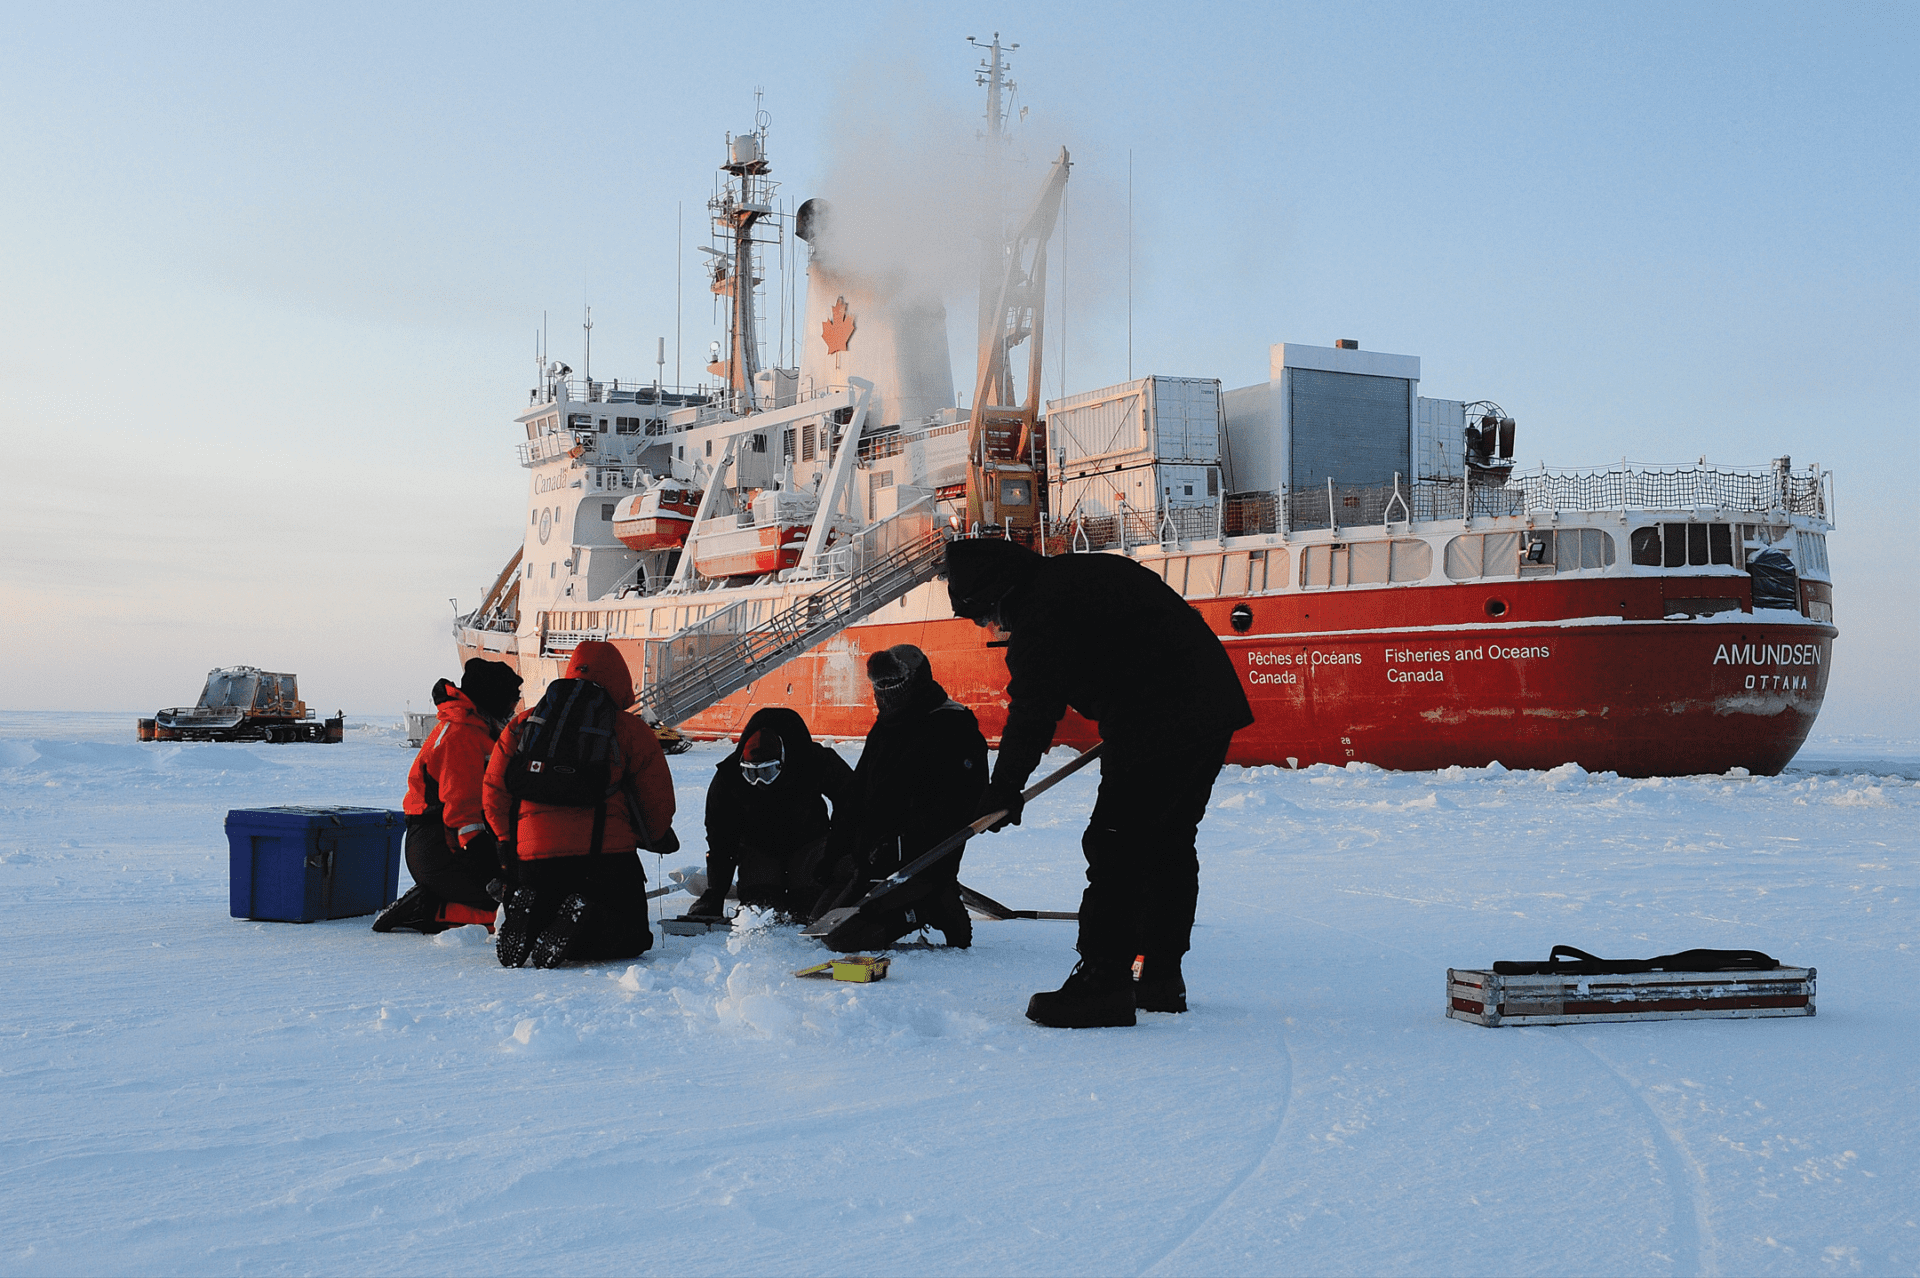 Workers on the snow with icebreaker CCGS Amundsen in the background